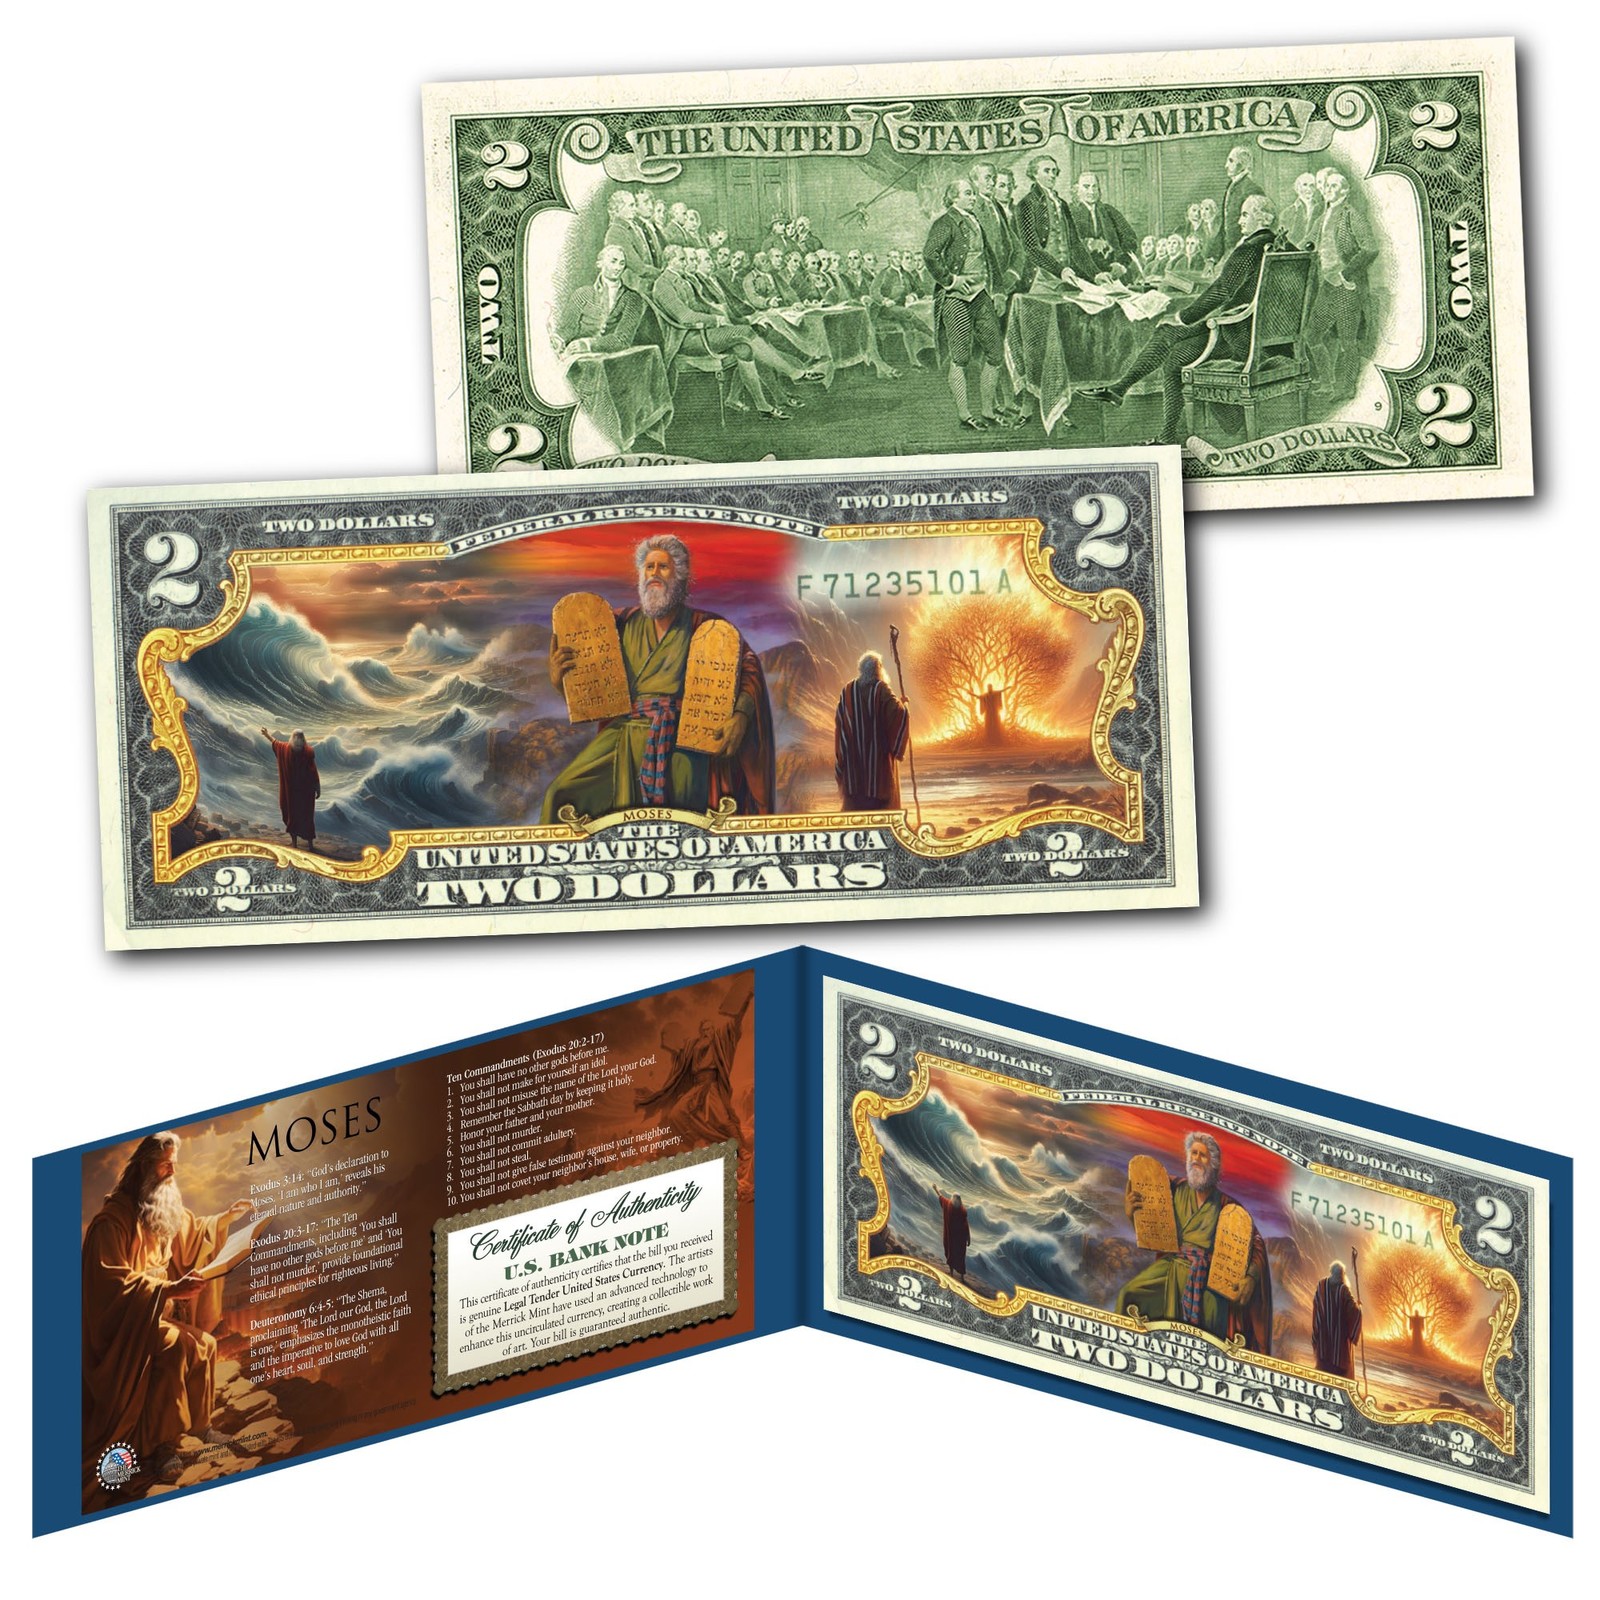 Primary image for MOSES The Ten Commandments Religious Authentic Legal Tender U.S. $2 Bill